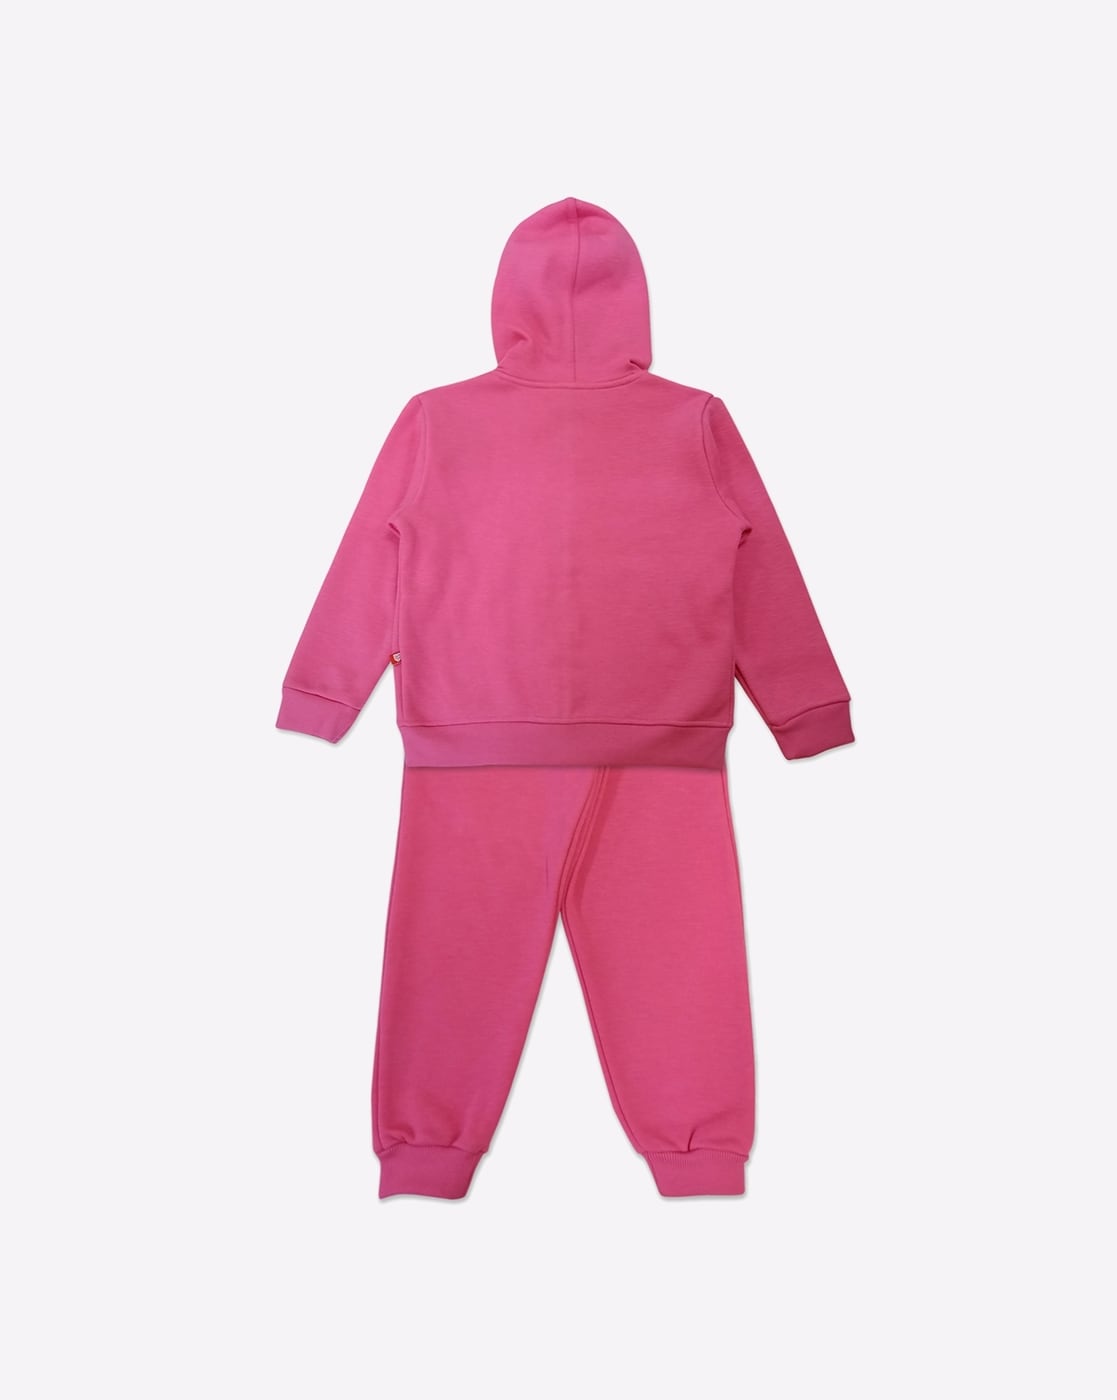 Tracksuit Hoodie Joggers Set With Radical Graphic Print Pink